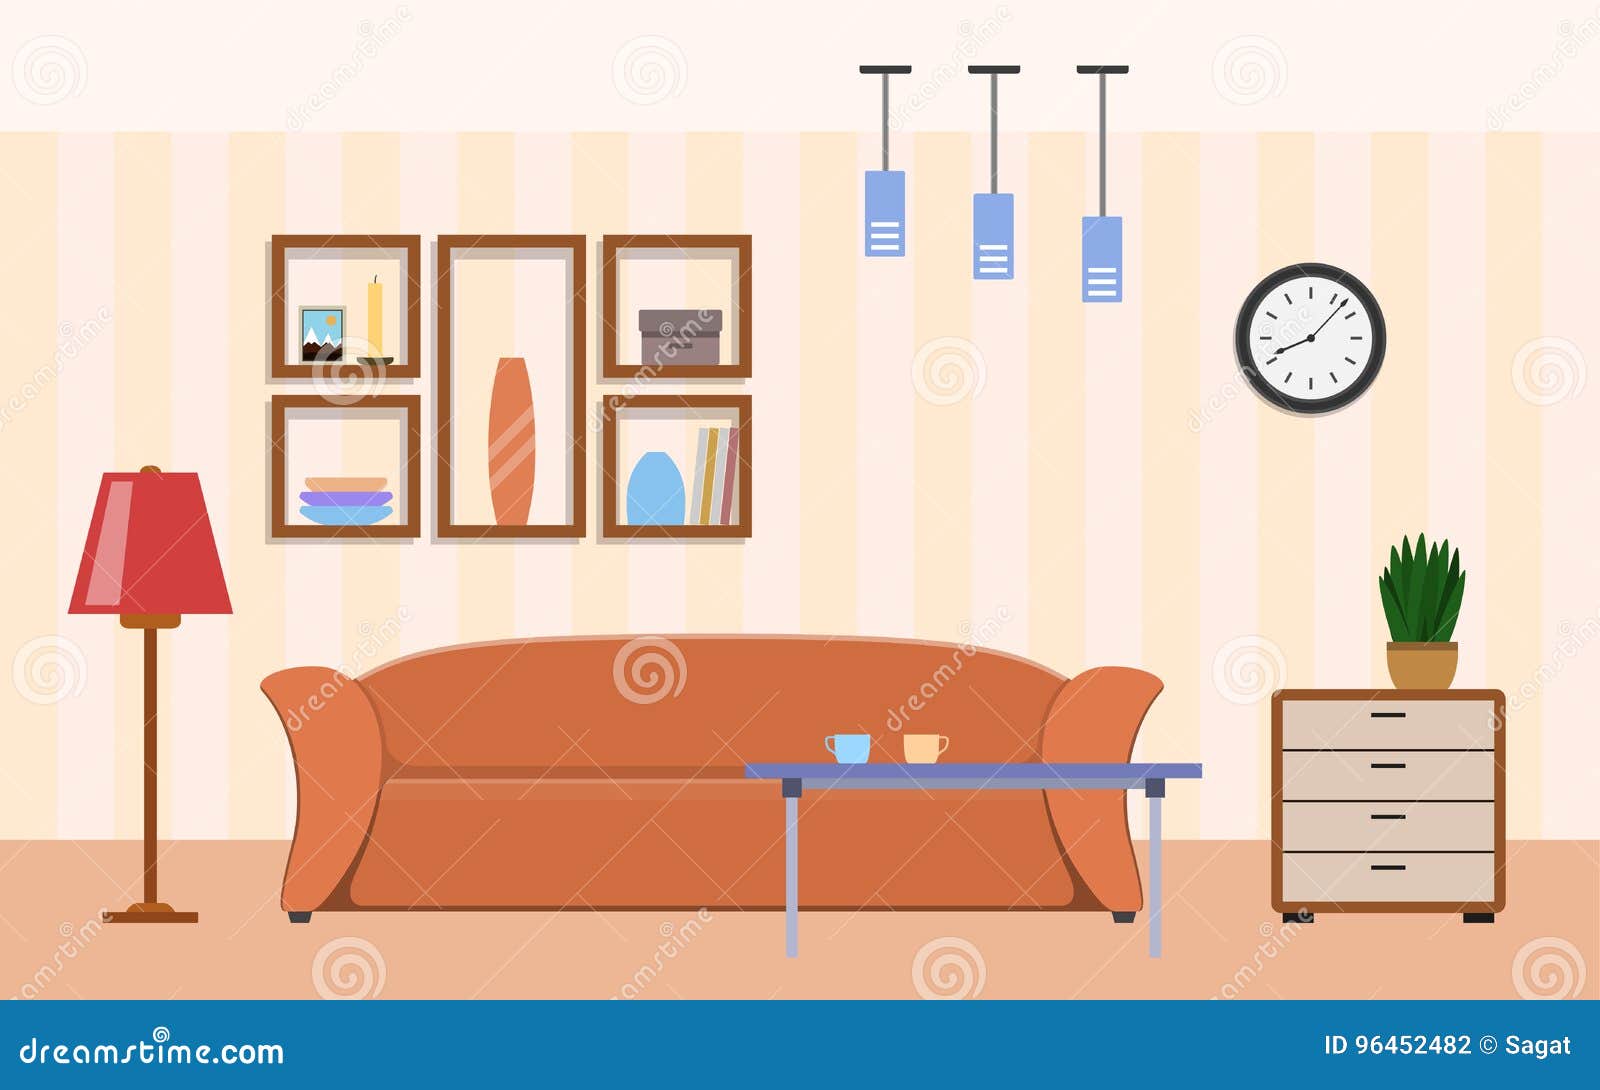 Living Room With Furniture Interior Design Stock Vector